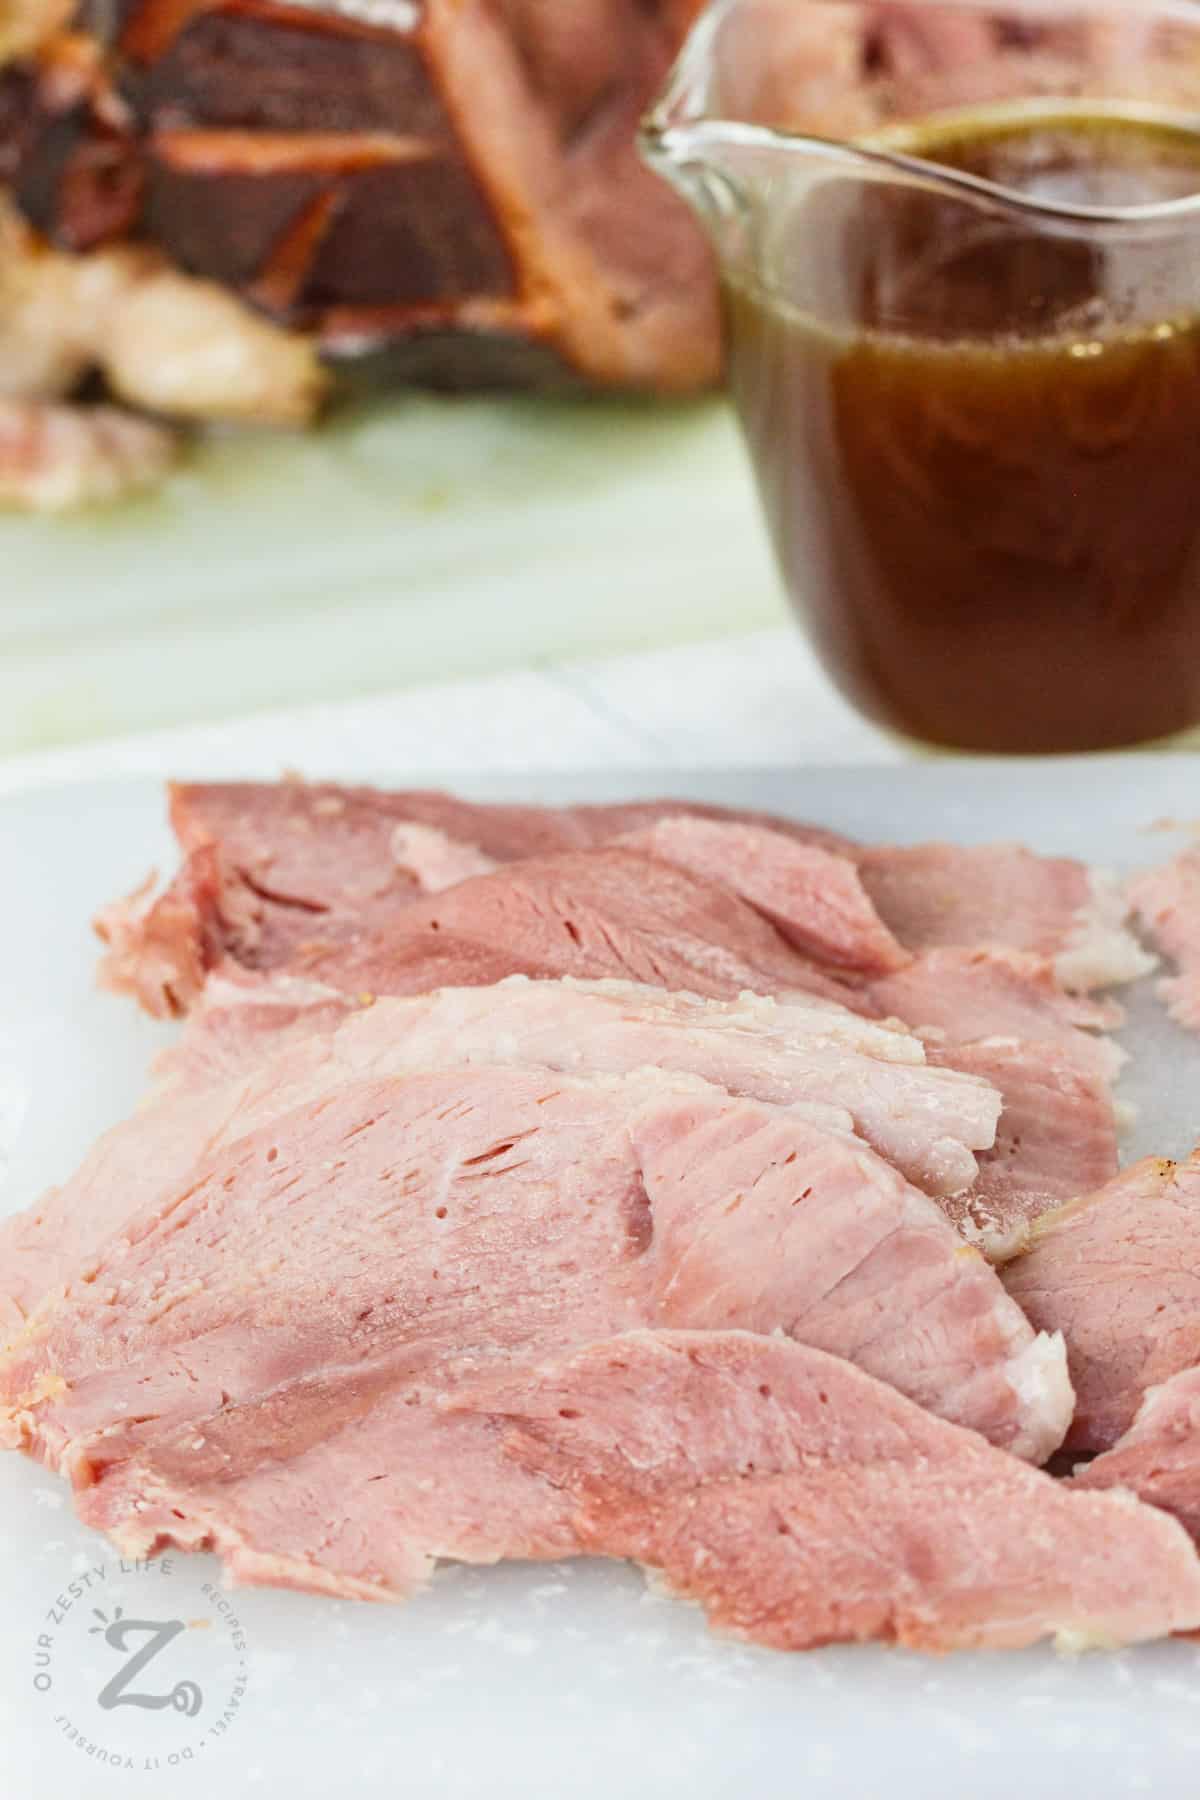 slices of Honey Glazed Baked Ham with a jar of glaze in the back